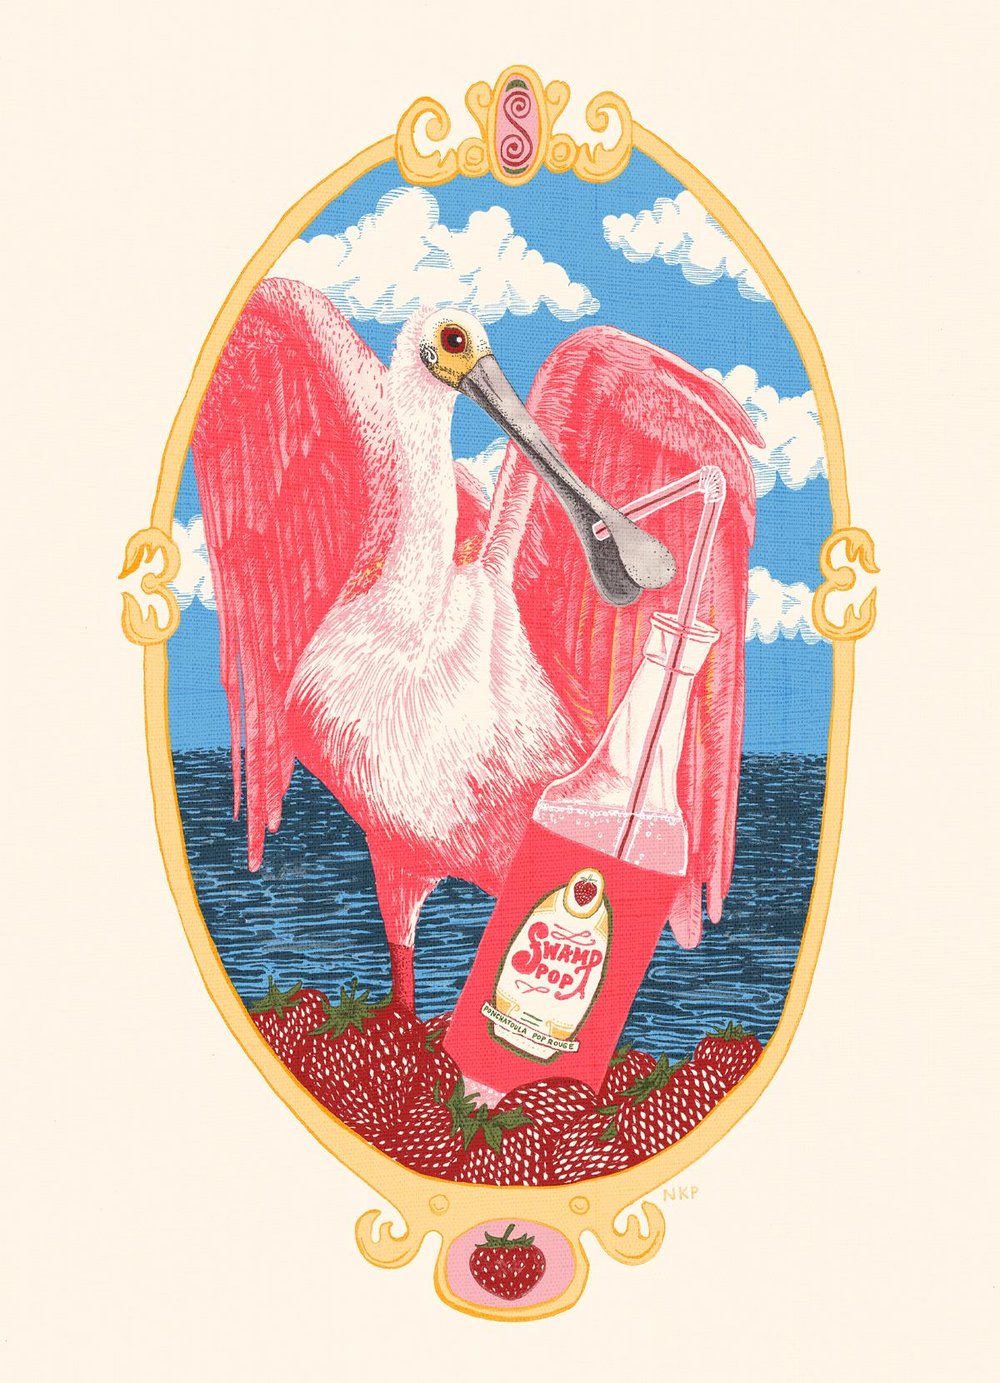 Swamp Pop Soda poster by Nora Patterson (image courtesy of the artist)